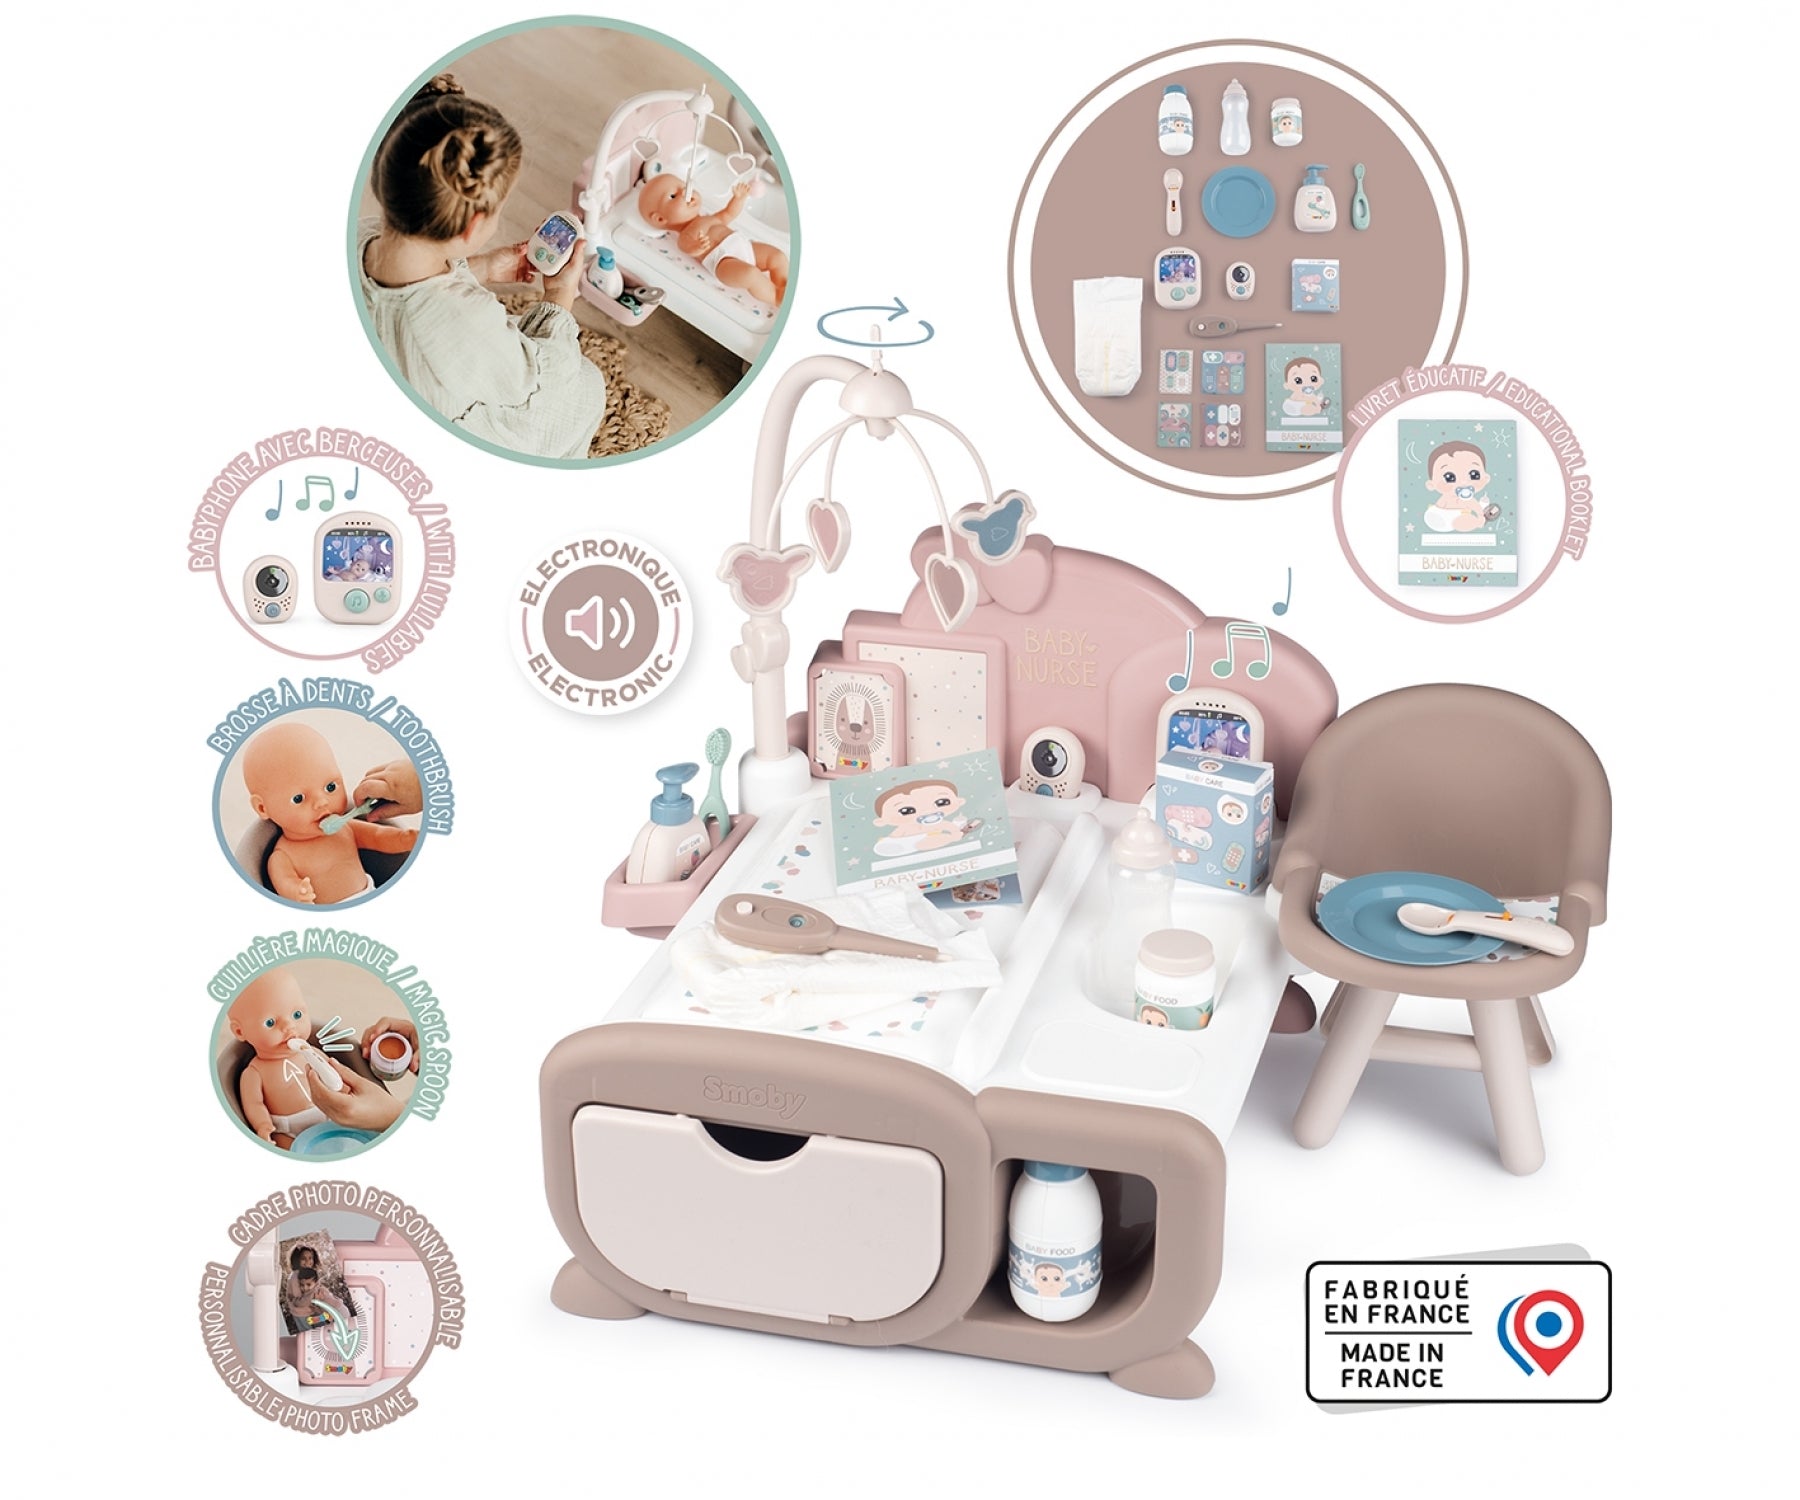 Smoby - Baby Care Center